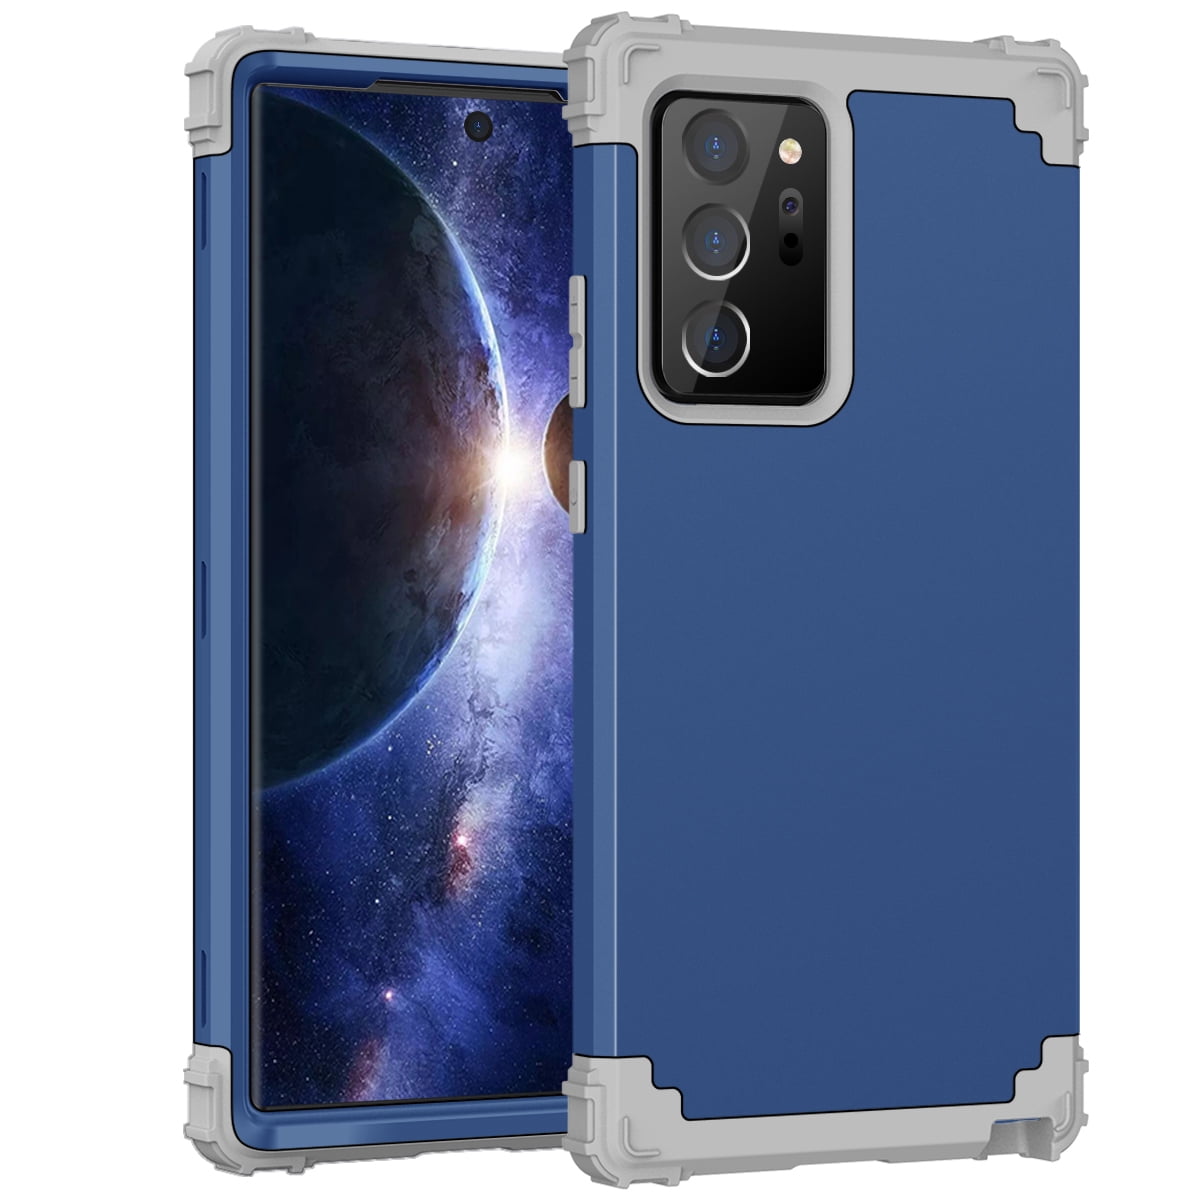 Blue 3 Layers MXX Case Compatible with Galaxy Note 20 Heavy Duty Protective Case with Rugged Rubber Shockproof Protection Cover for Galaxy Note 20 